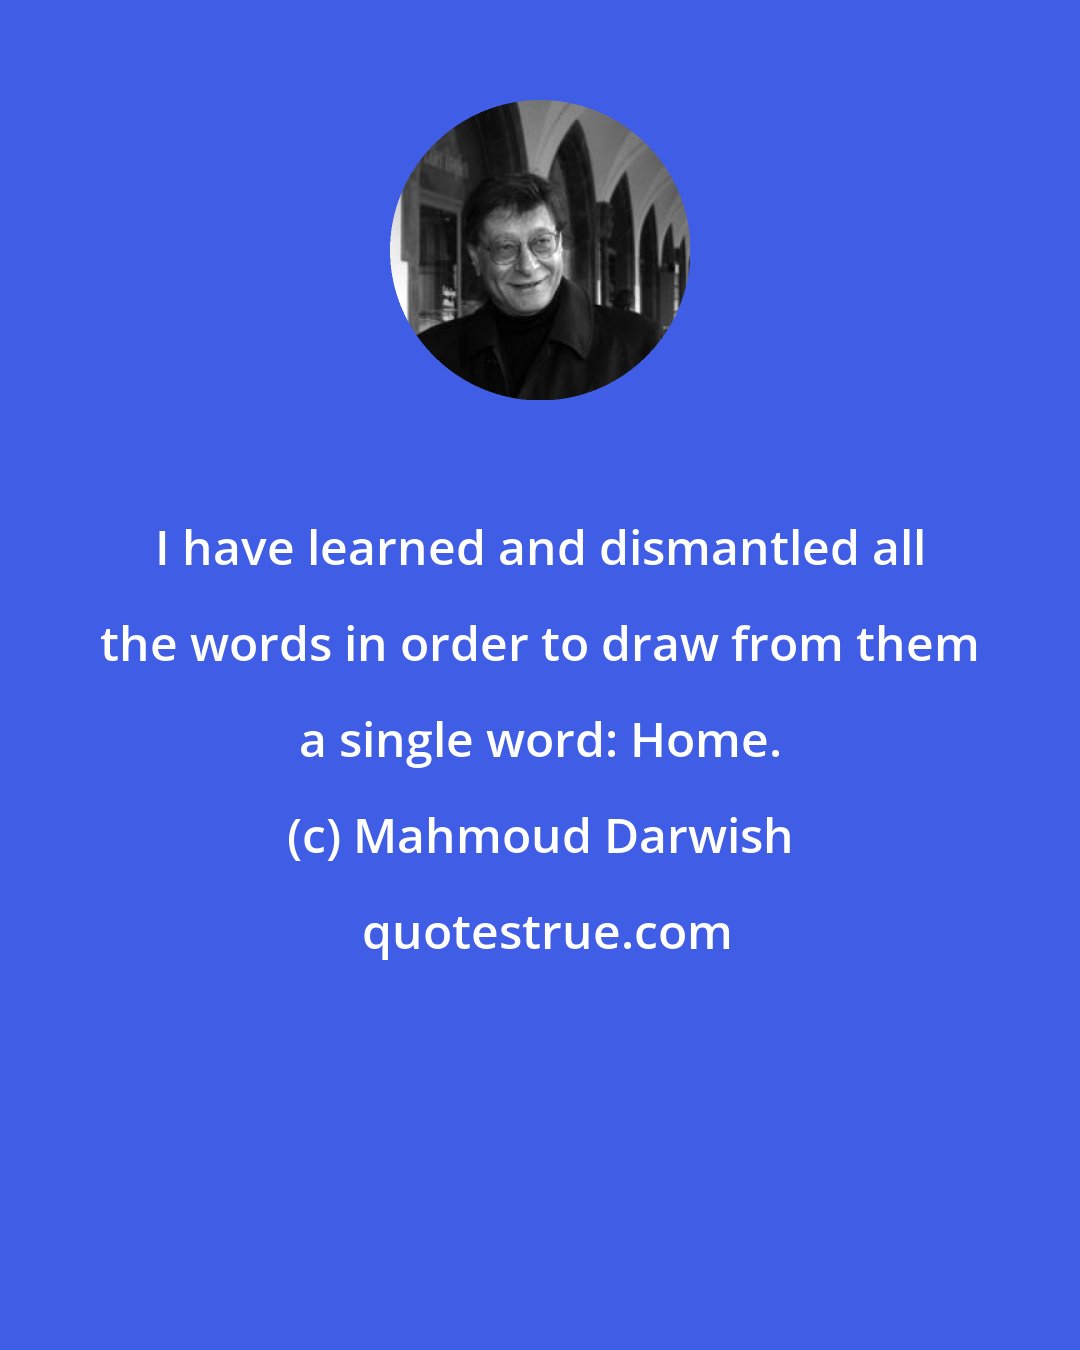 Mahmoud Darwish: I have learned and dismantled all the words in order to draw from them a single word: Home.